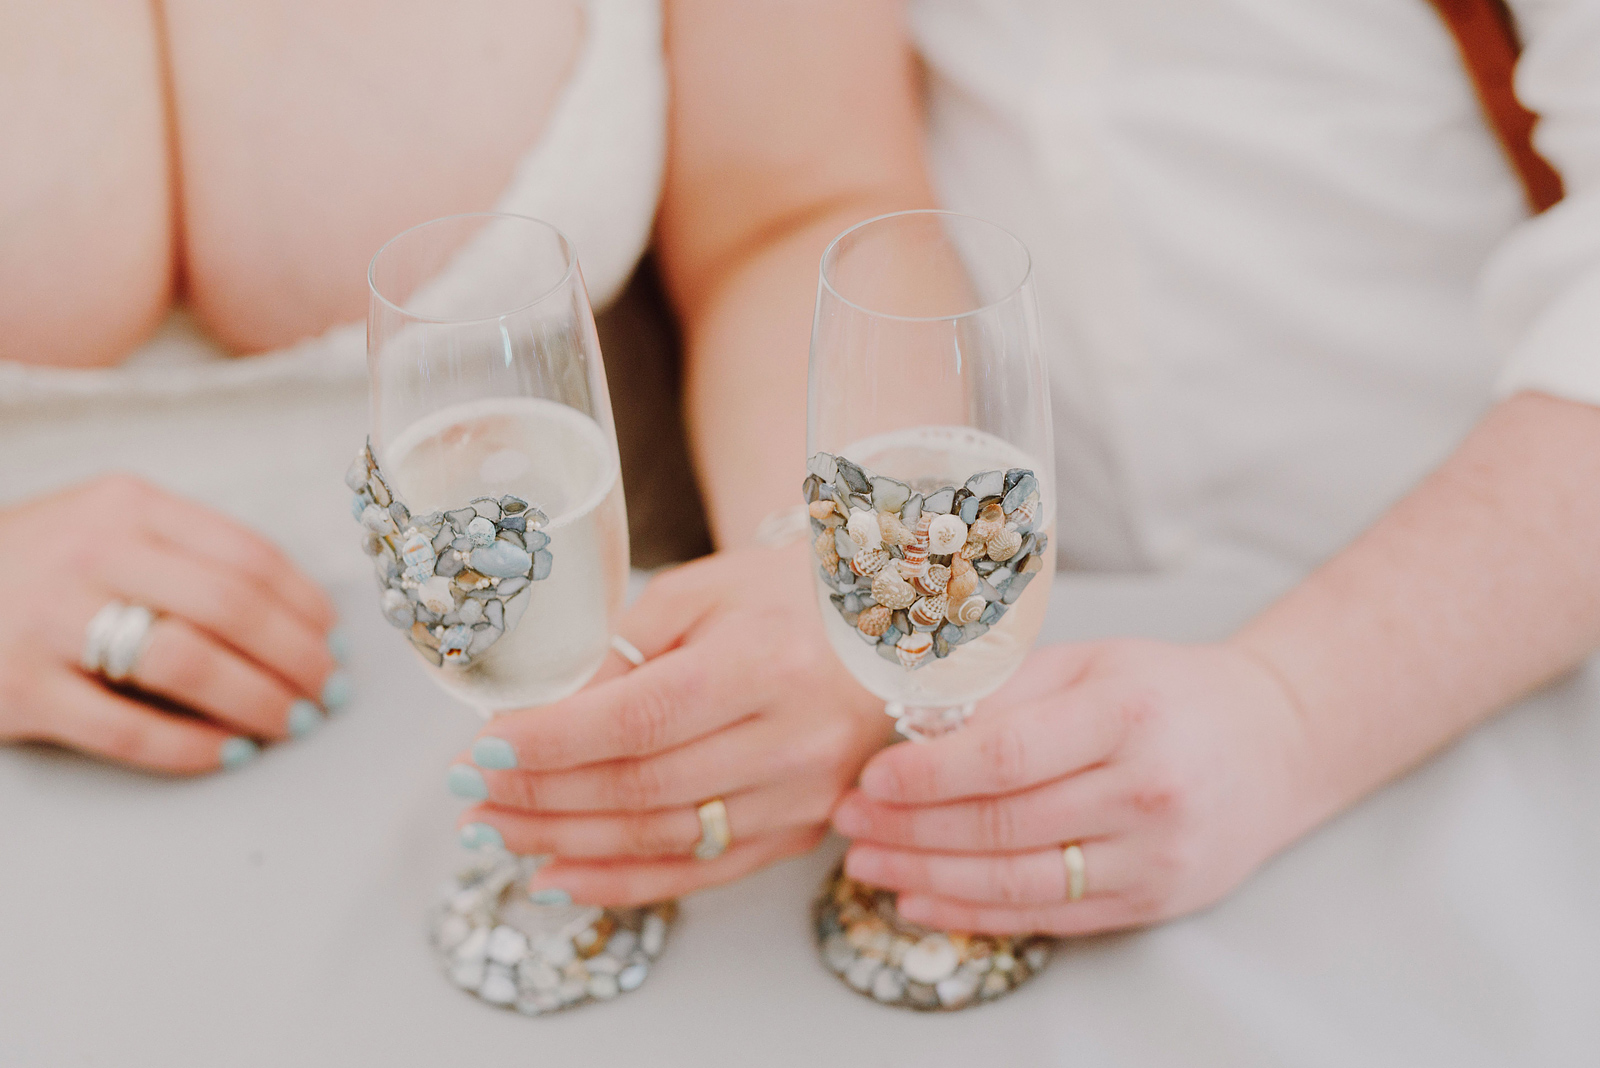 Champagne glasses decorated with shells found on the beach - Oceanside Community Club Wedding on the Oregon Coast” title=